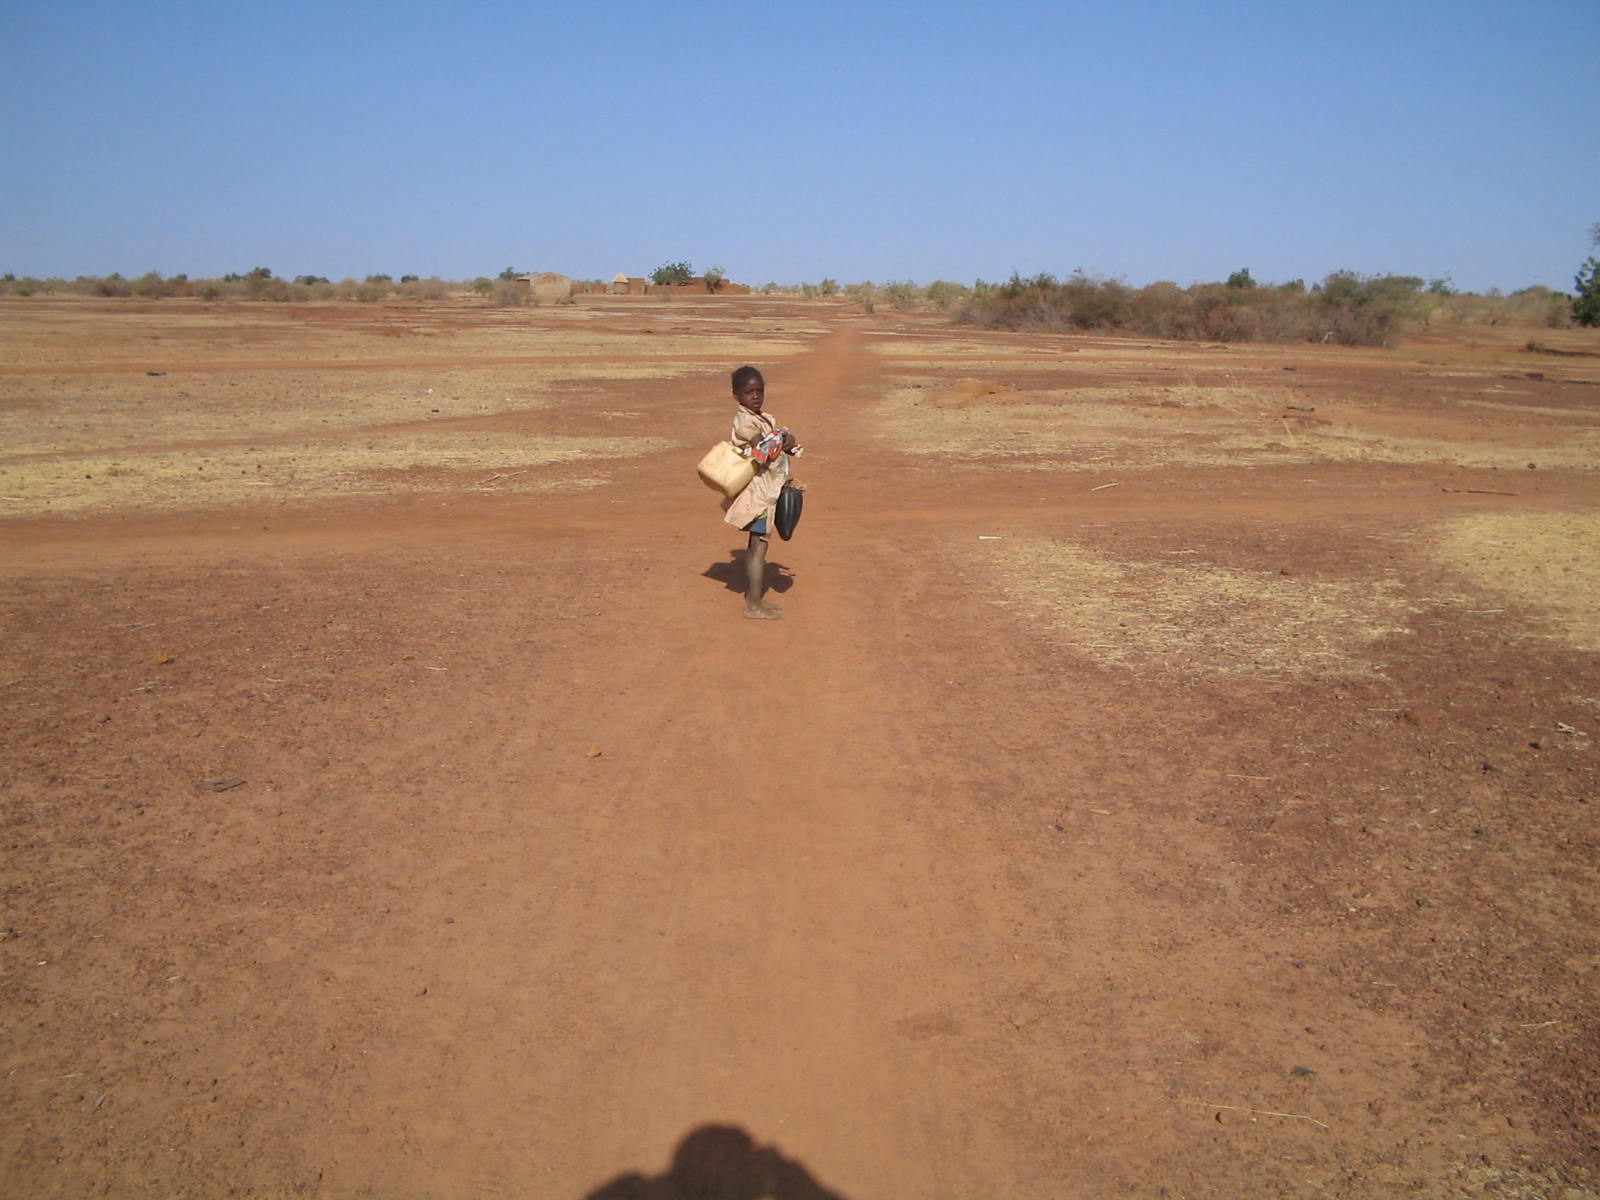 a man running across a dirt road carrying a suitcase